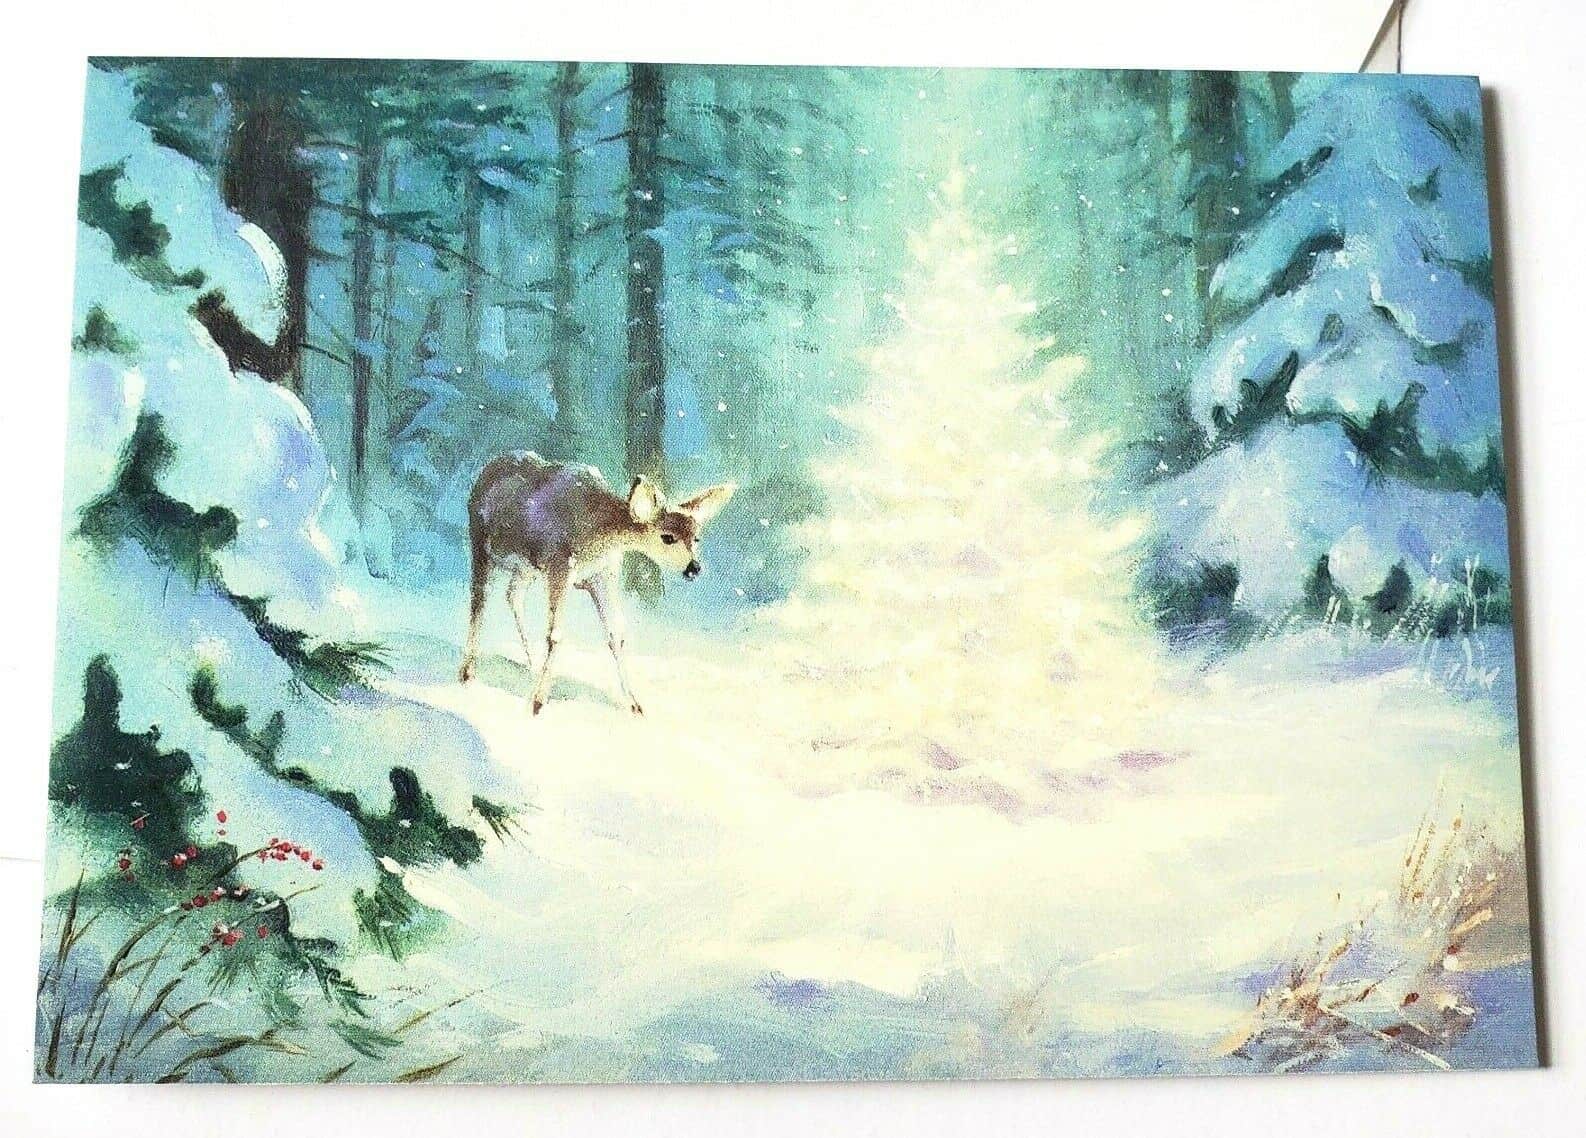 Deer in Snowy Forest Standing By A Glowing Lighted Tree